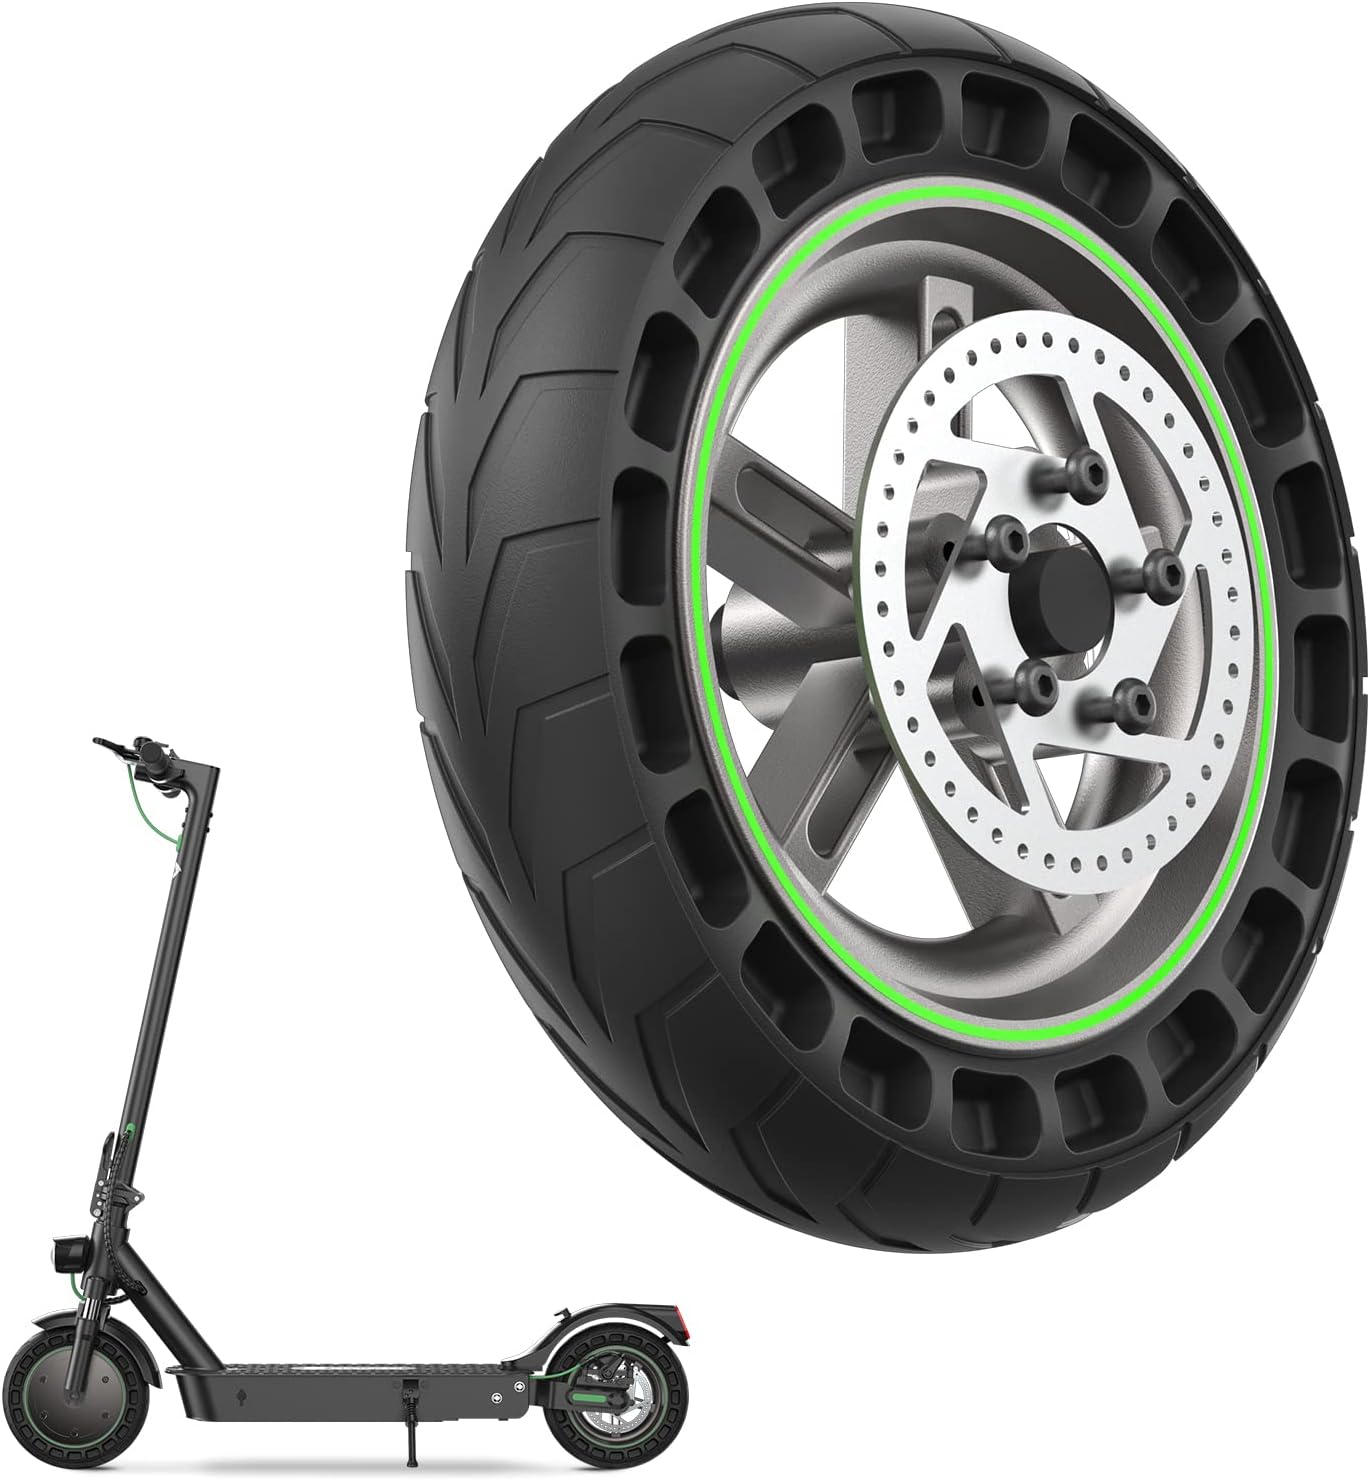 iSinwheel Official Store Rear Wheel Replacement for S9 MAX Electric Scooter